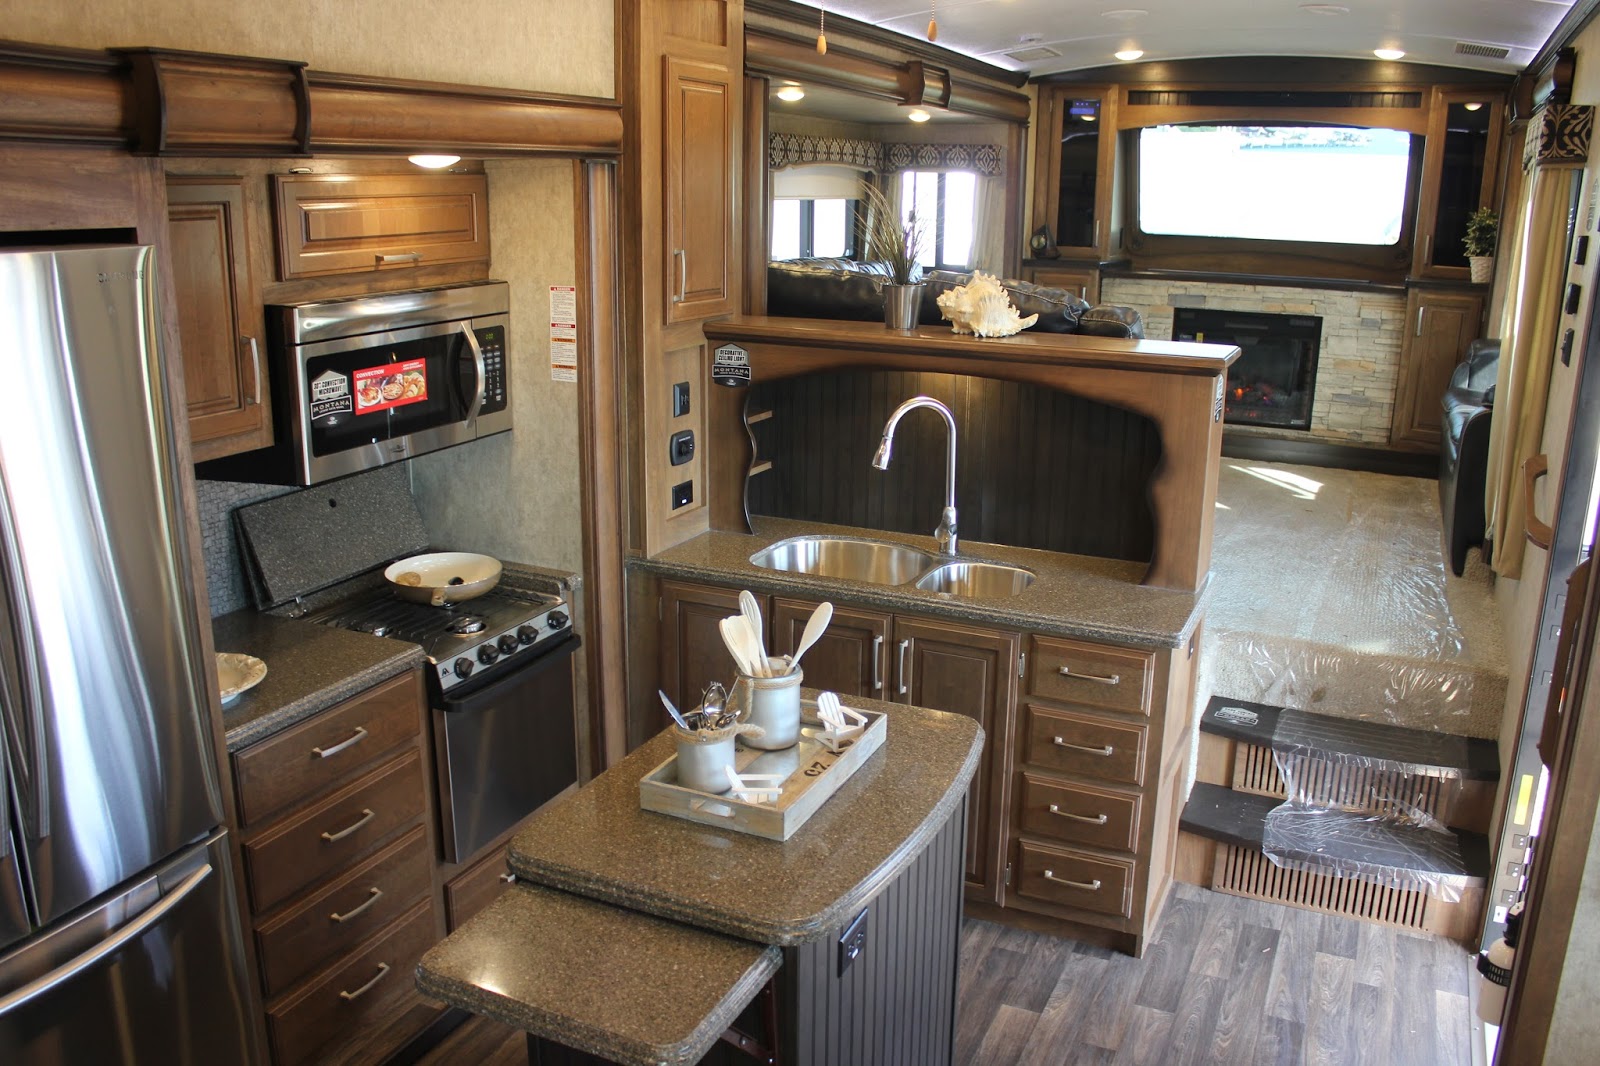 Gr8LakesCamper Highlights From The RV Dealer Open House